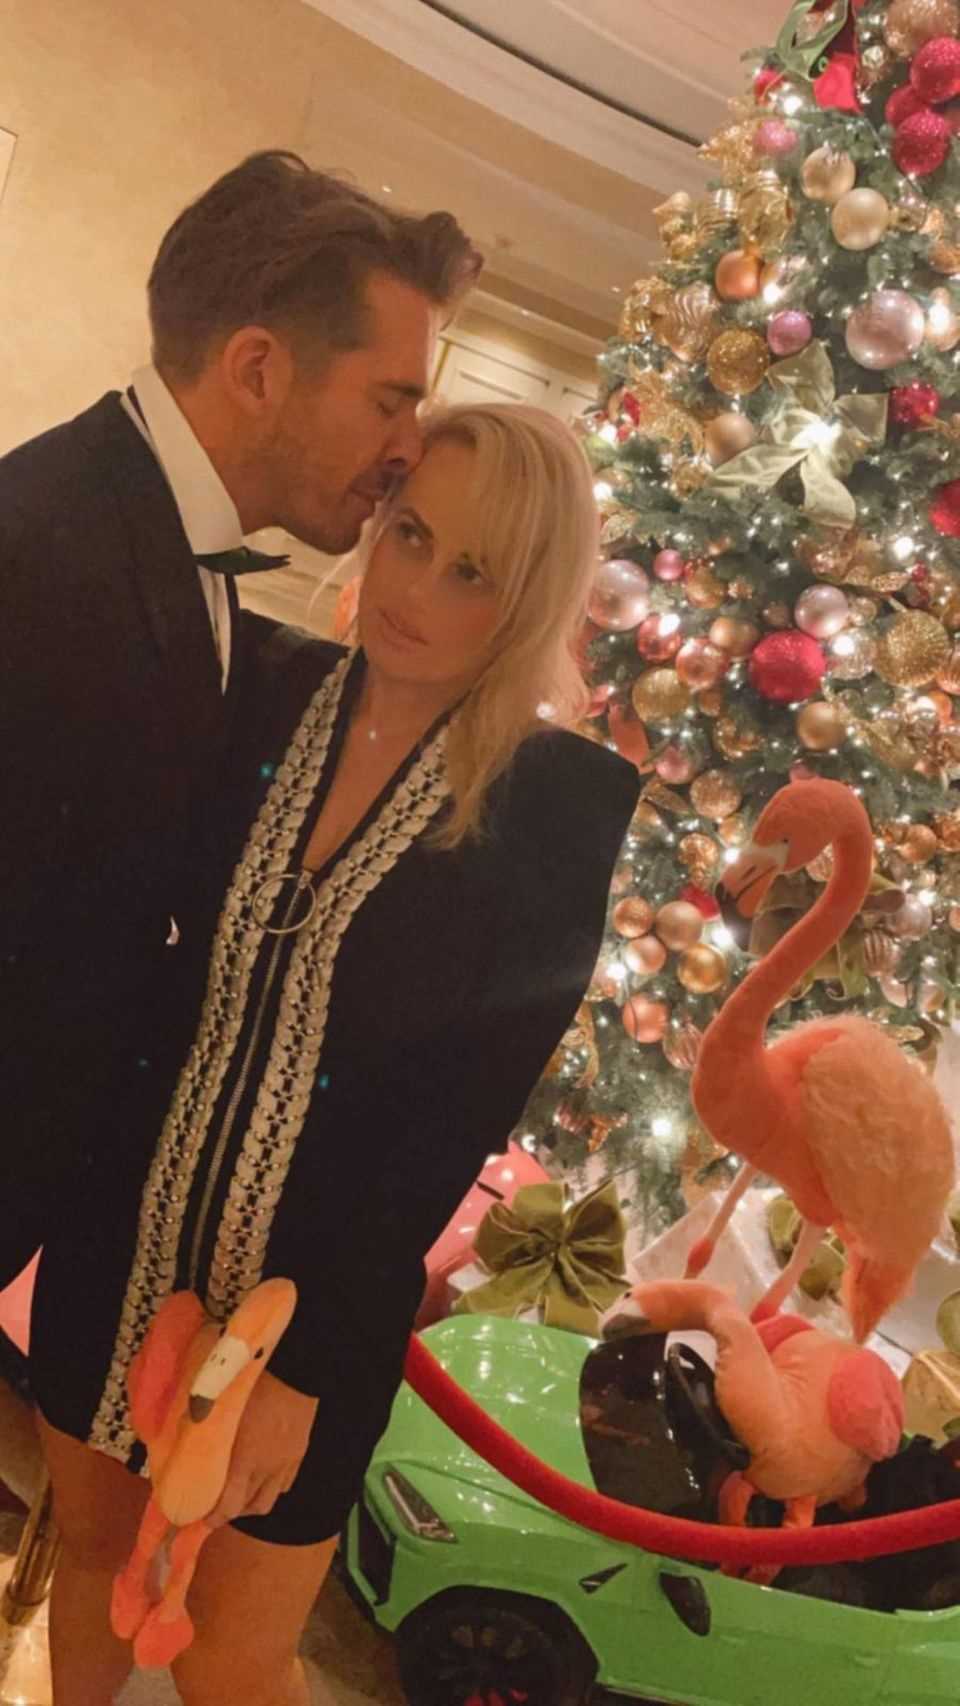 You kiss good friends: Rebel Wilson shares footage of a Christmas party with Hugh Sheridan.